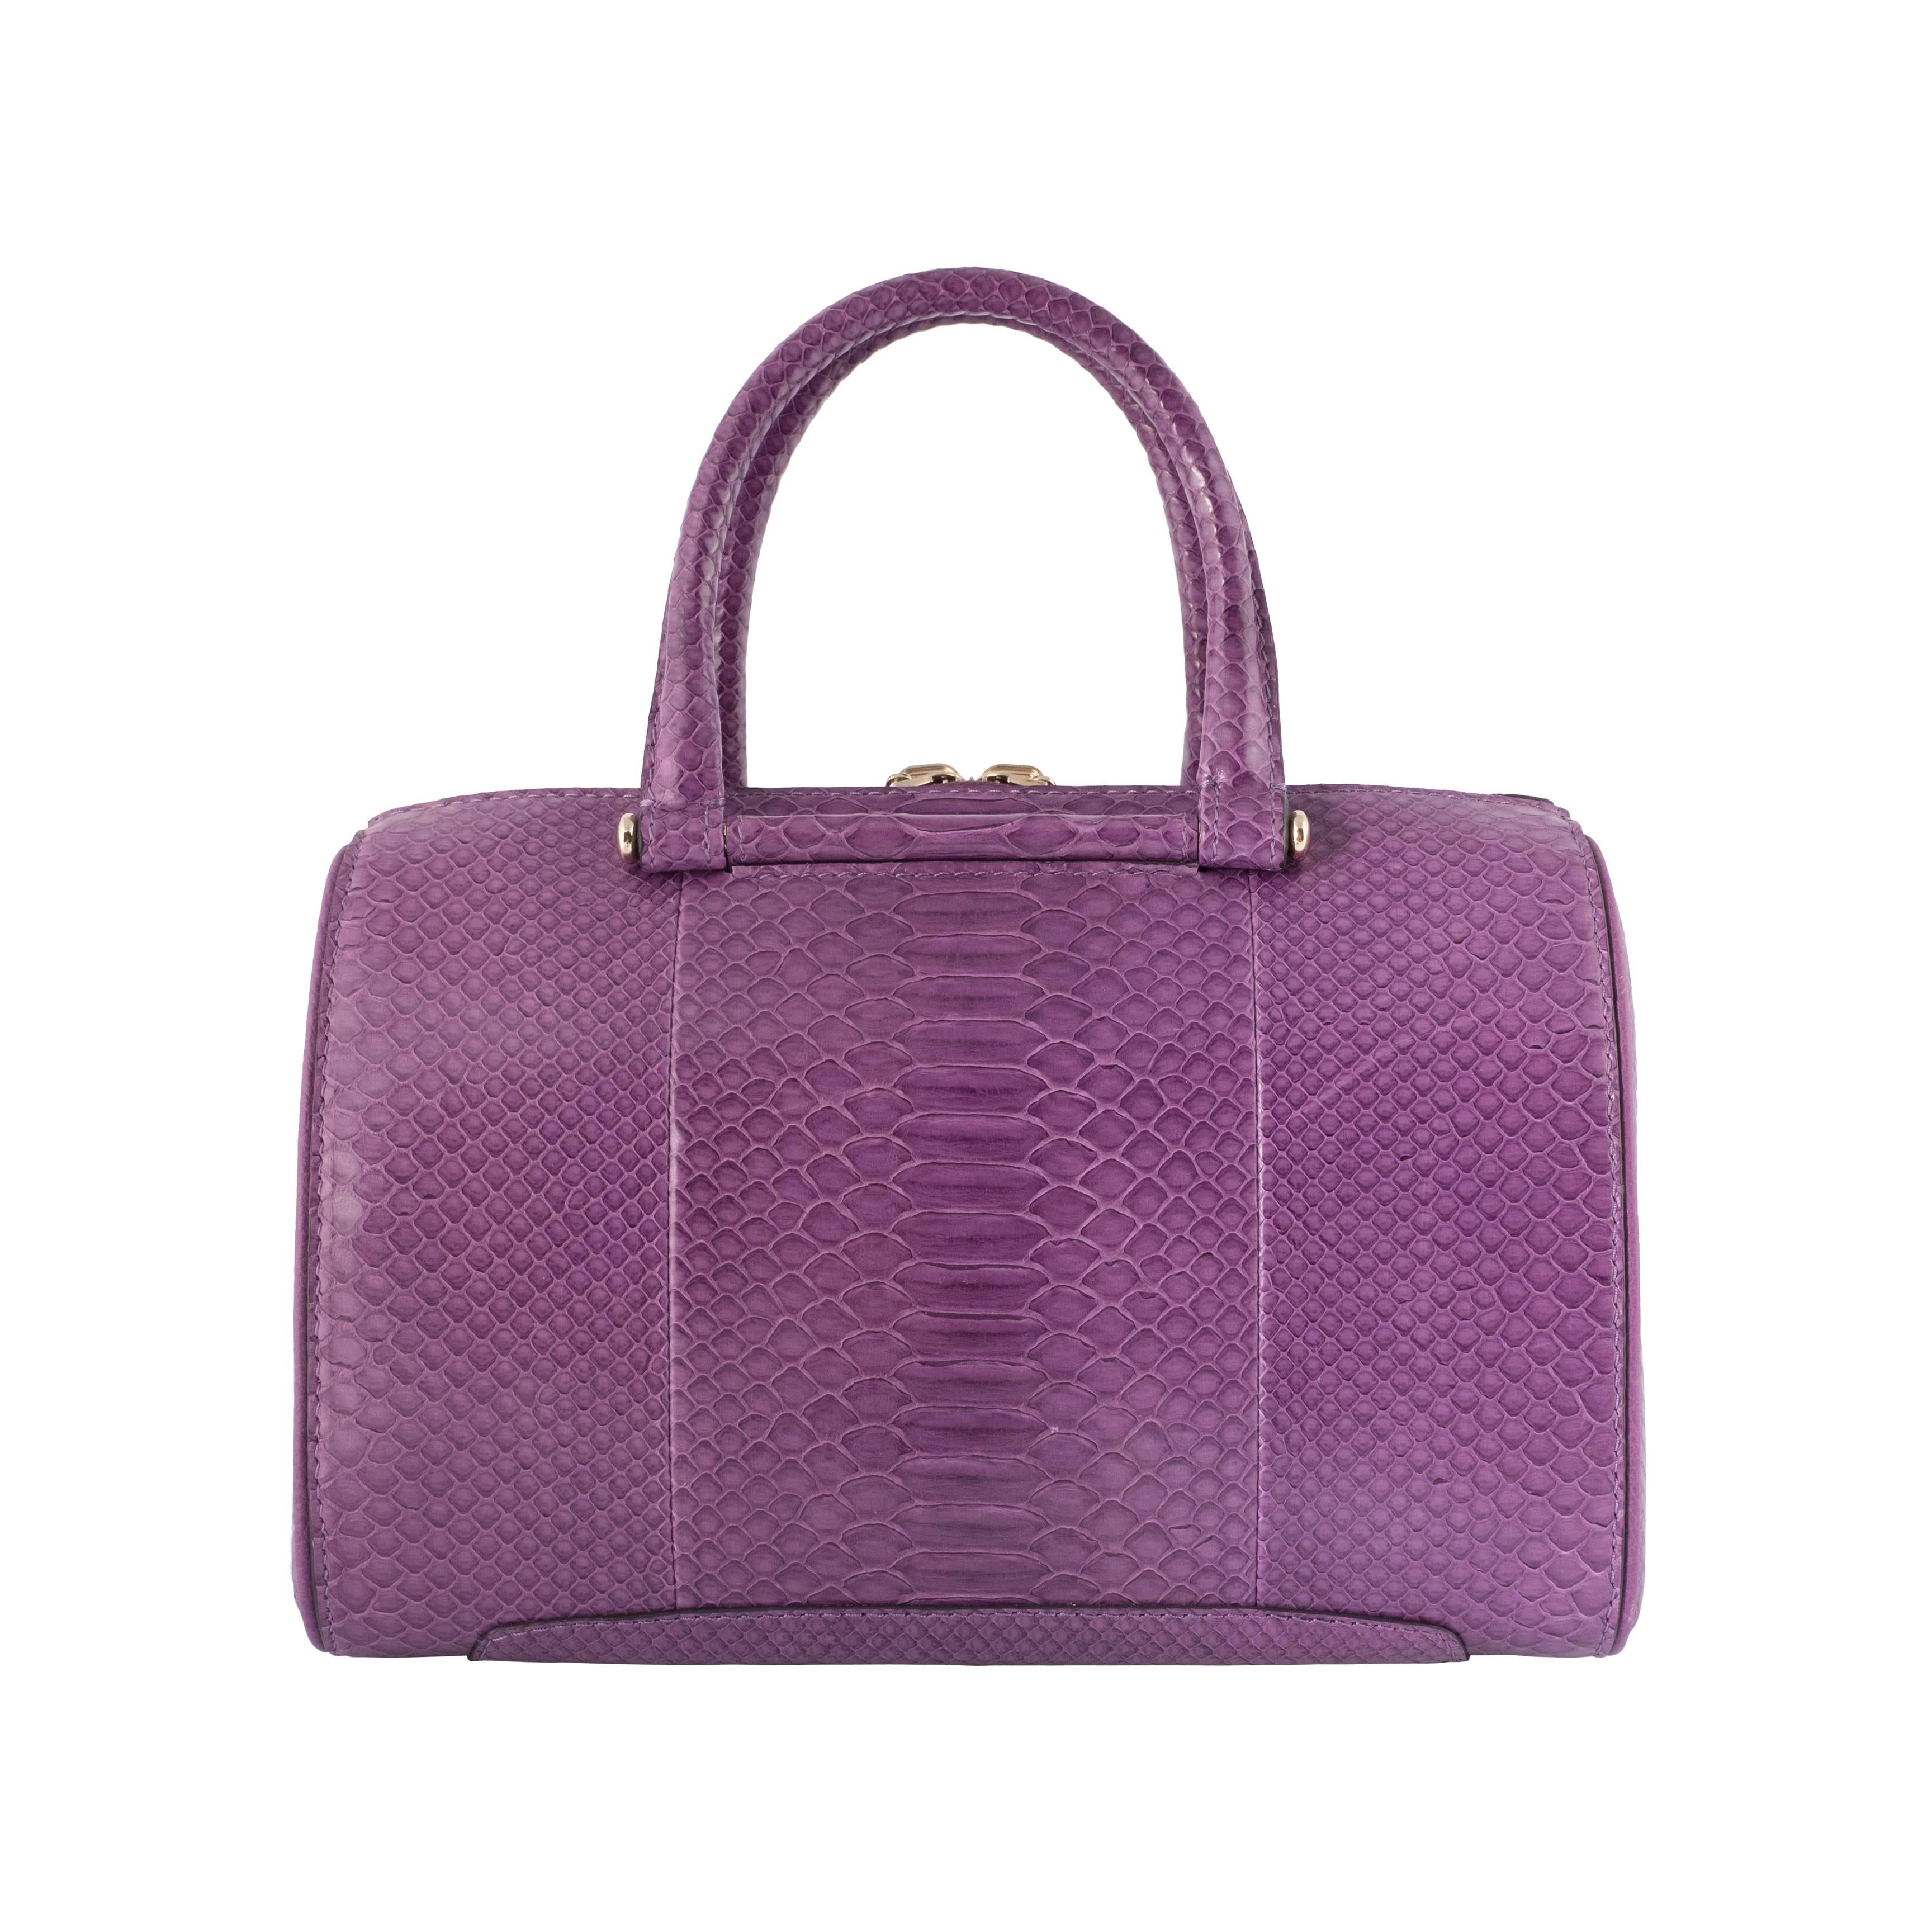 VBH Parker 31cm Shiny Viola Python Boston Tote In New Condition For Sale In New York, NY